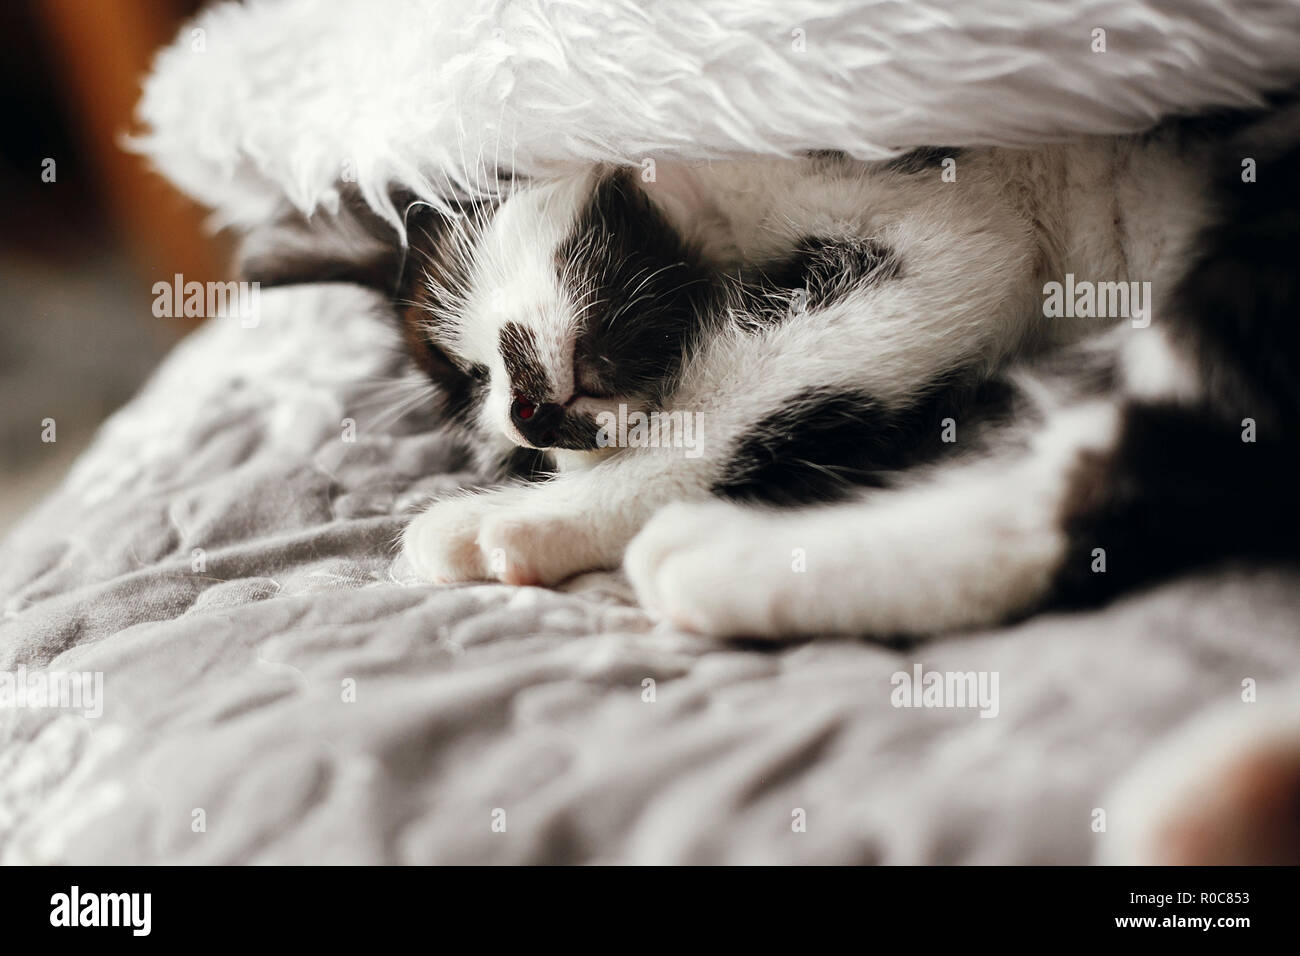 Cute kitty sleeping in santa hat on bed in festive room. Merry Christmas concept. Atmospheric image. Season's greetings. Space text. Adorable kitten n Stock Photo